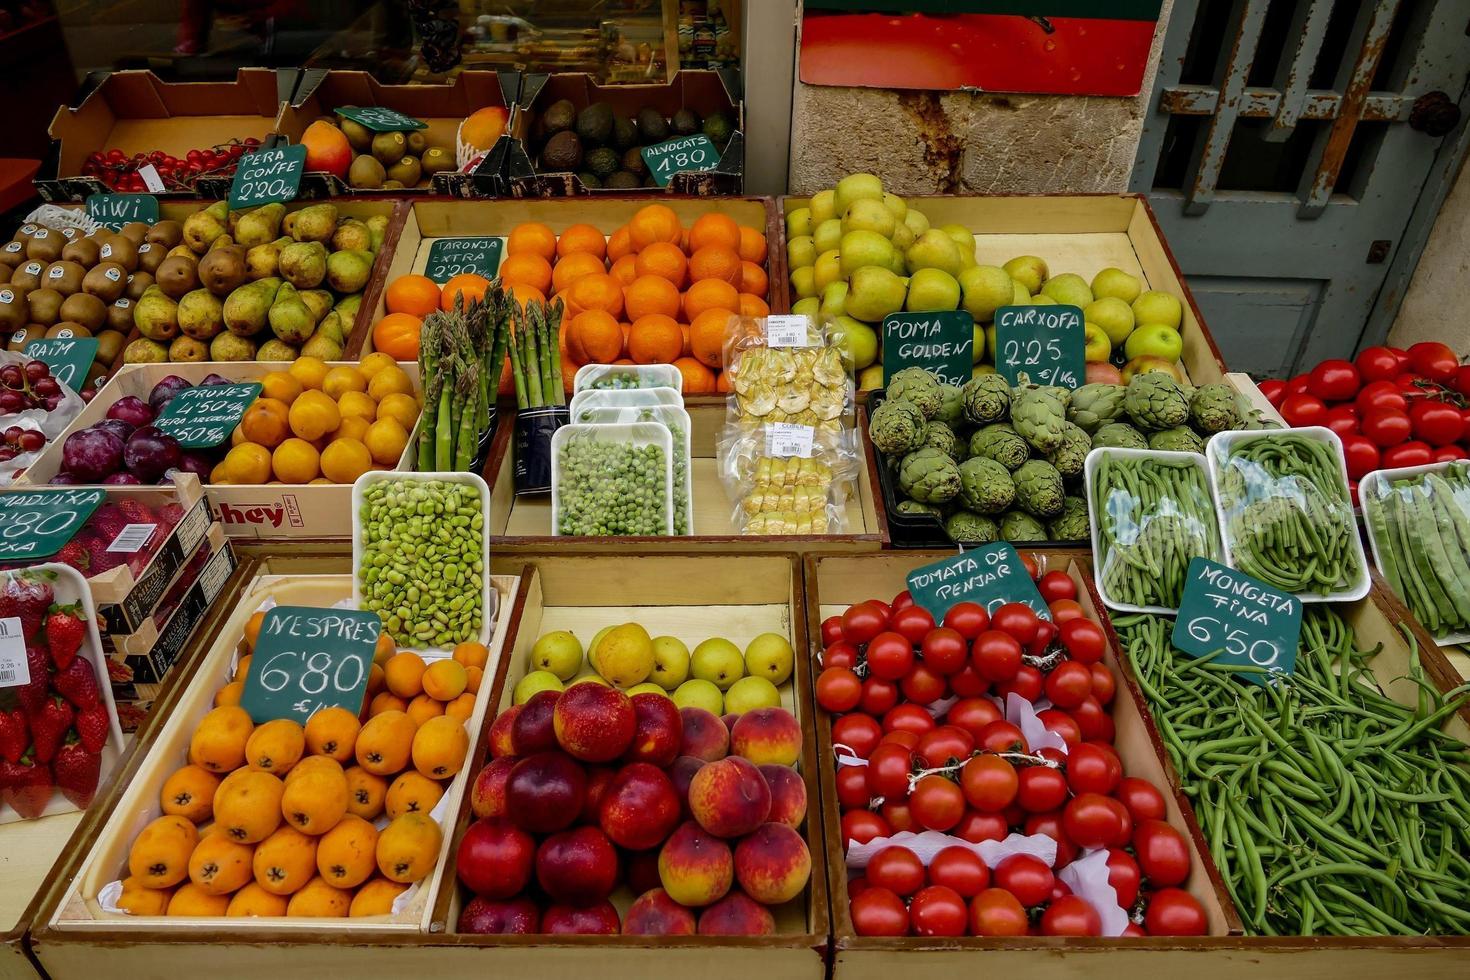 Spain, 2022 - View of produce photo